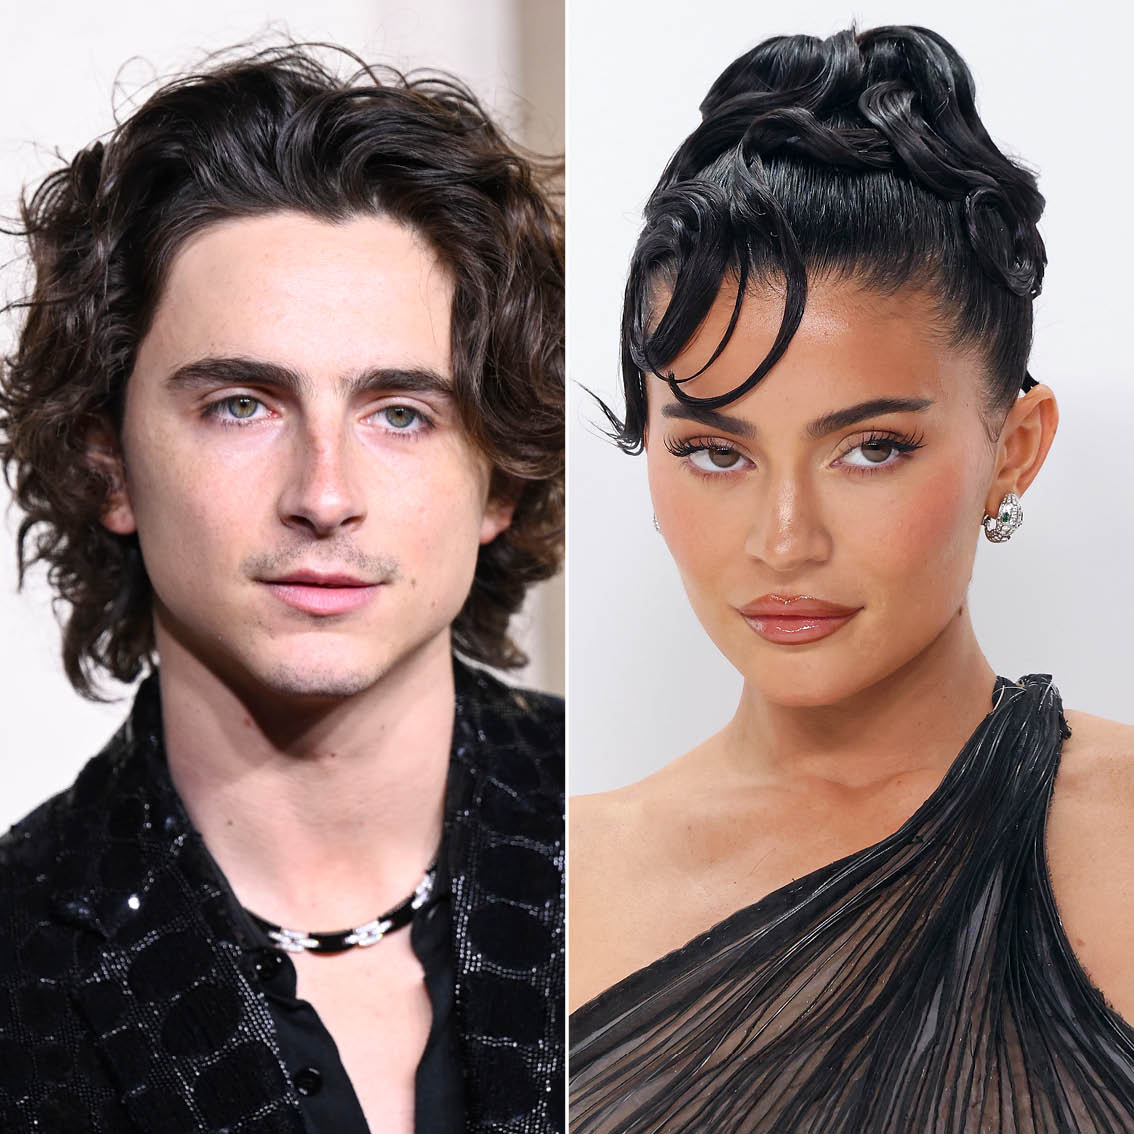 Kylie Jenner & Timotheé Chalamet Are Not Expecting a Baby, Sources Confirm